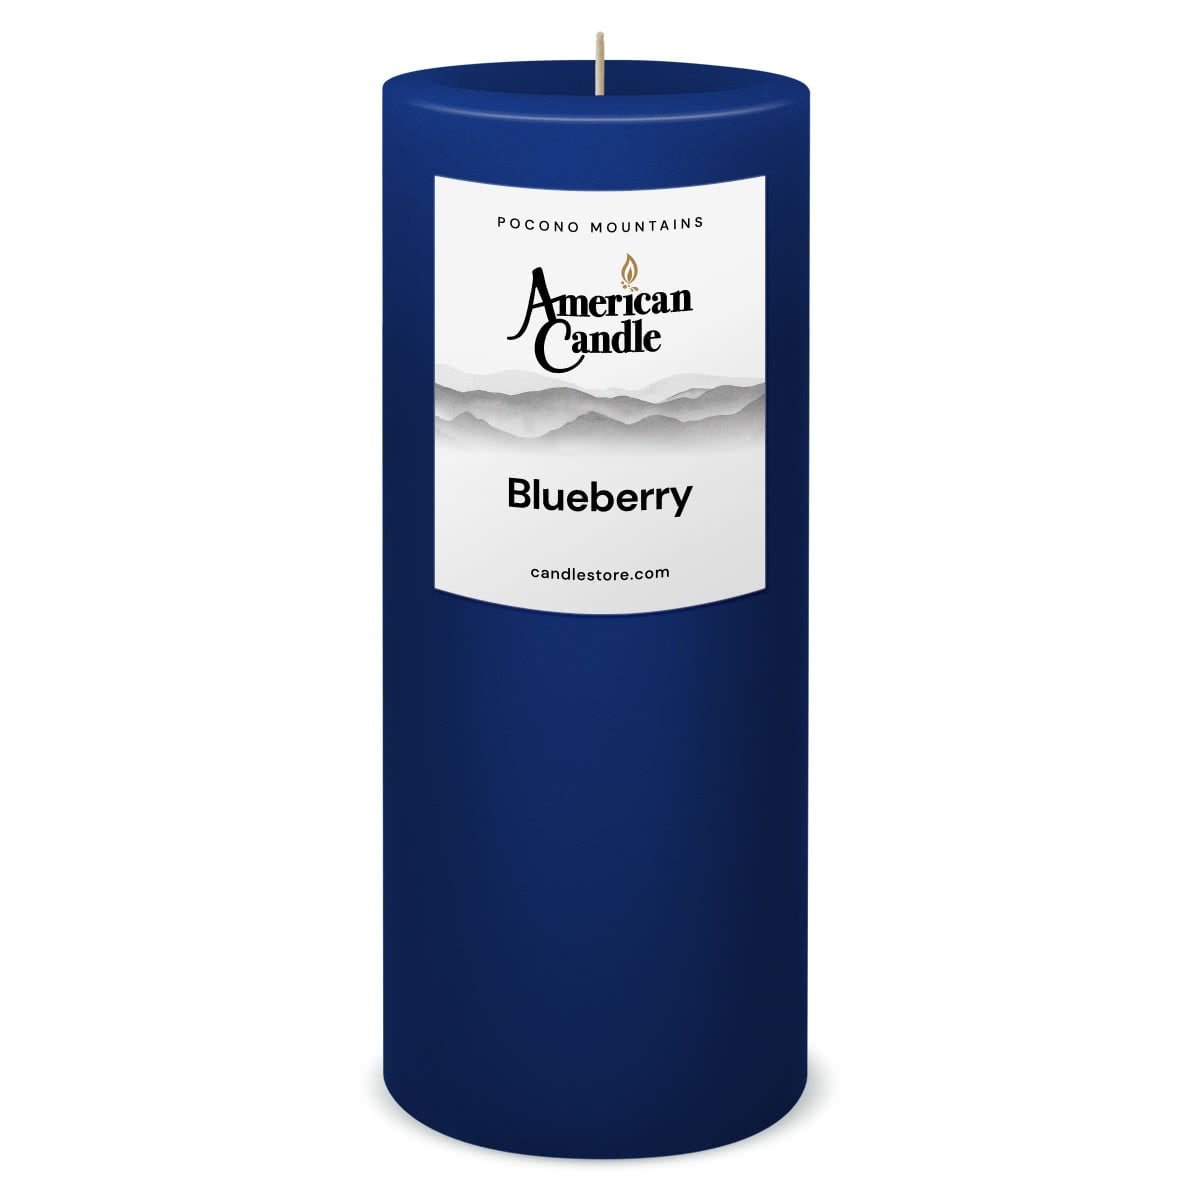 Blueberry Scented 3x9 Pillar Candle by American Candle